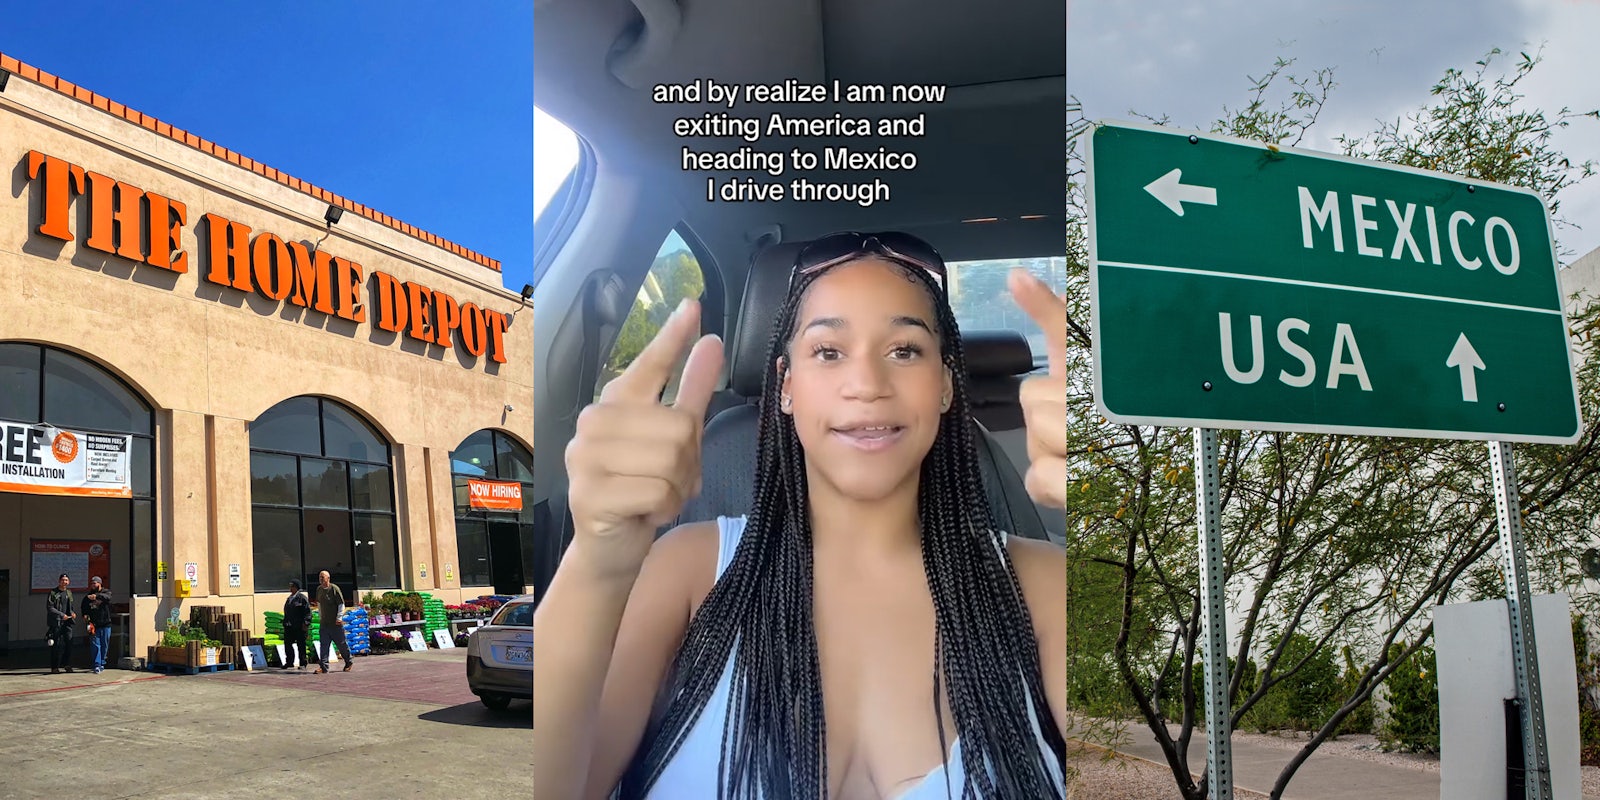 Home Depot building with sign (l) woman speaking in car with caption 'and by realize I am now exiting America and heading to Mexico I drive through' (c) Mexico USA directions on sign (r)